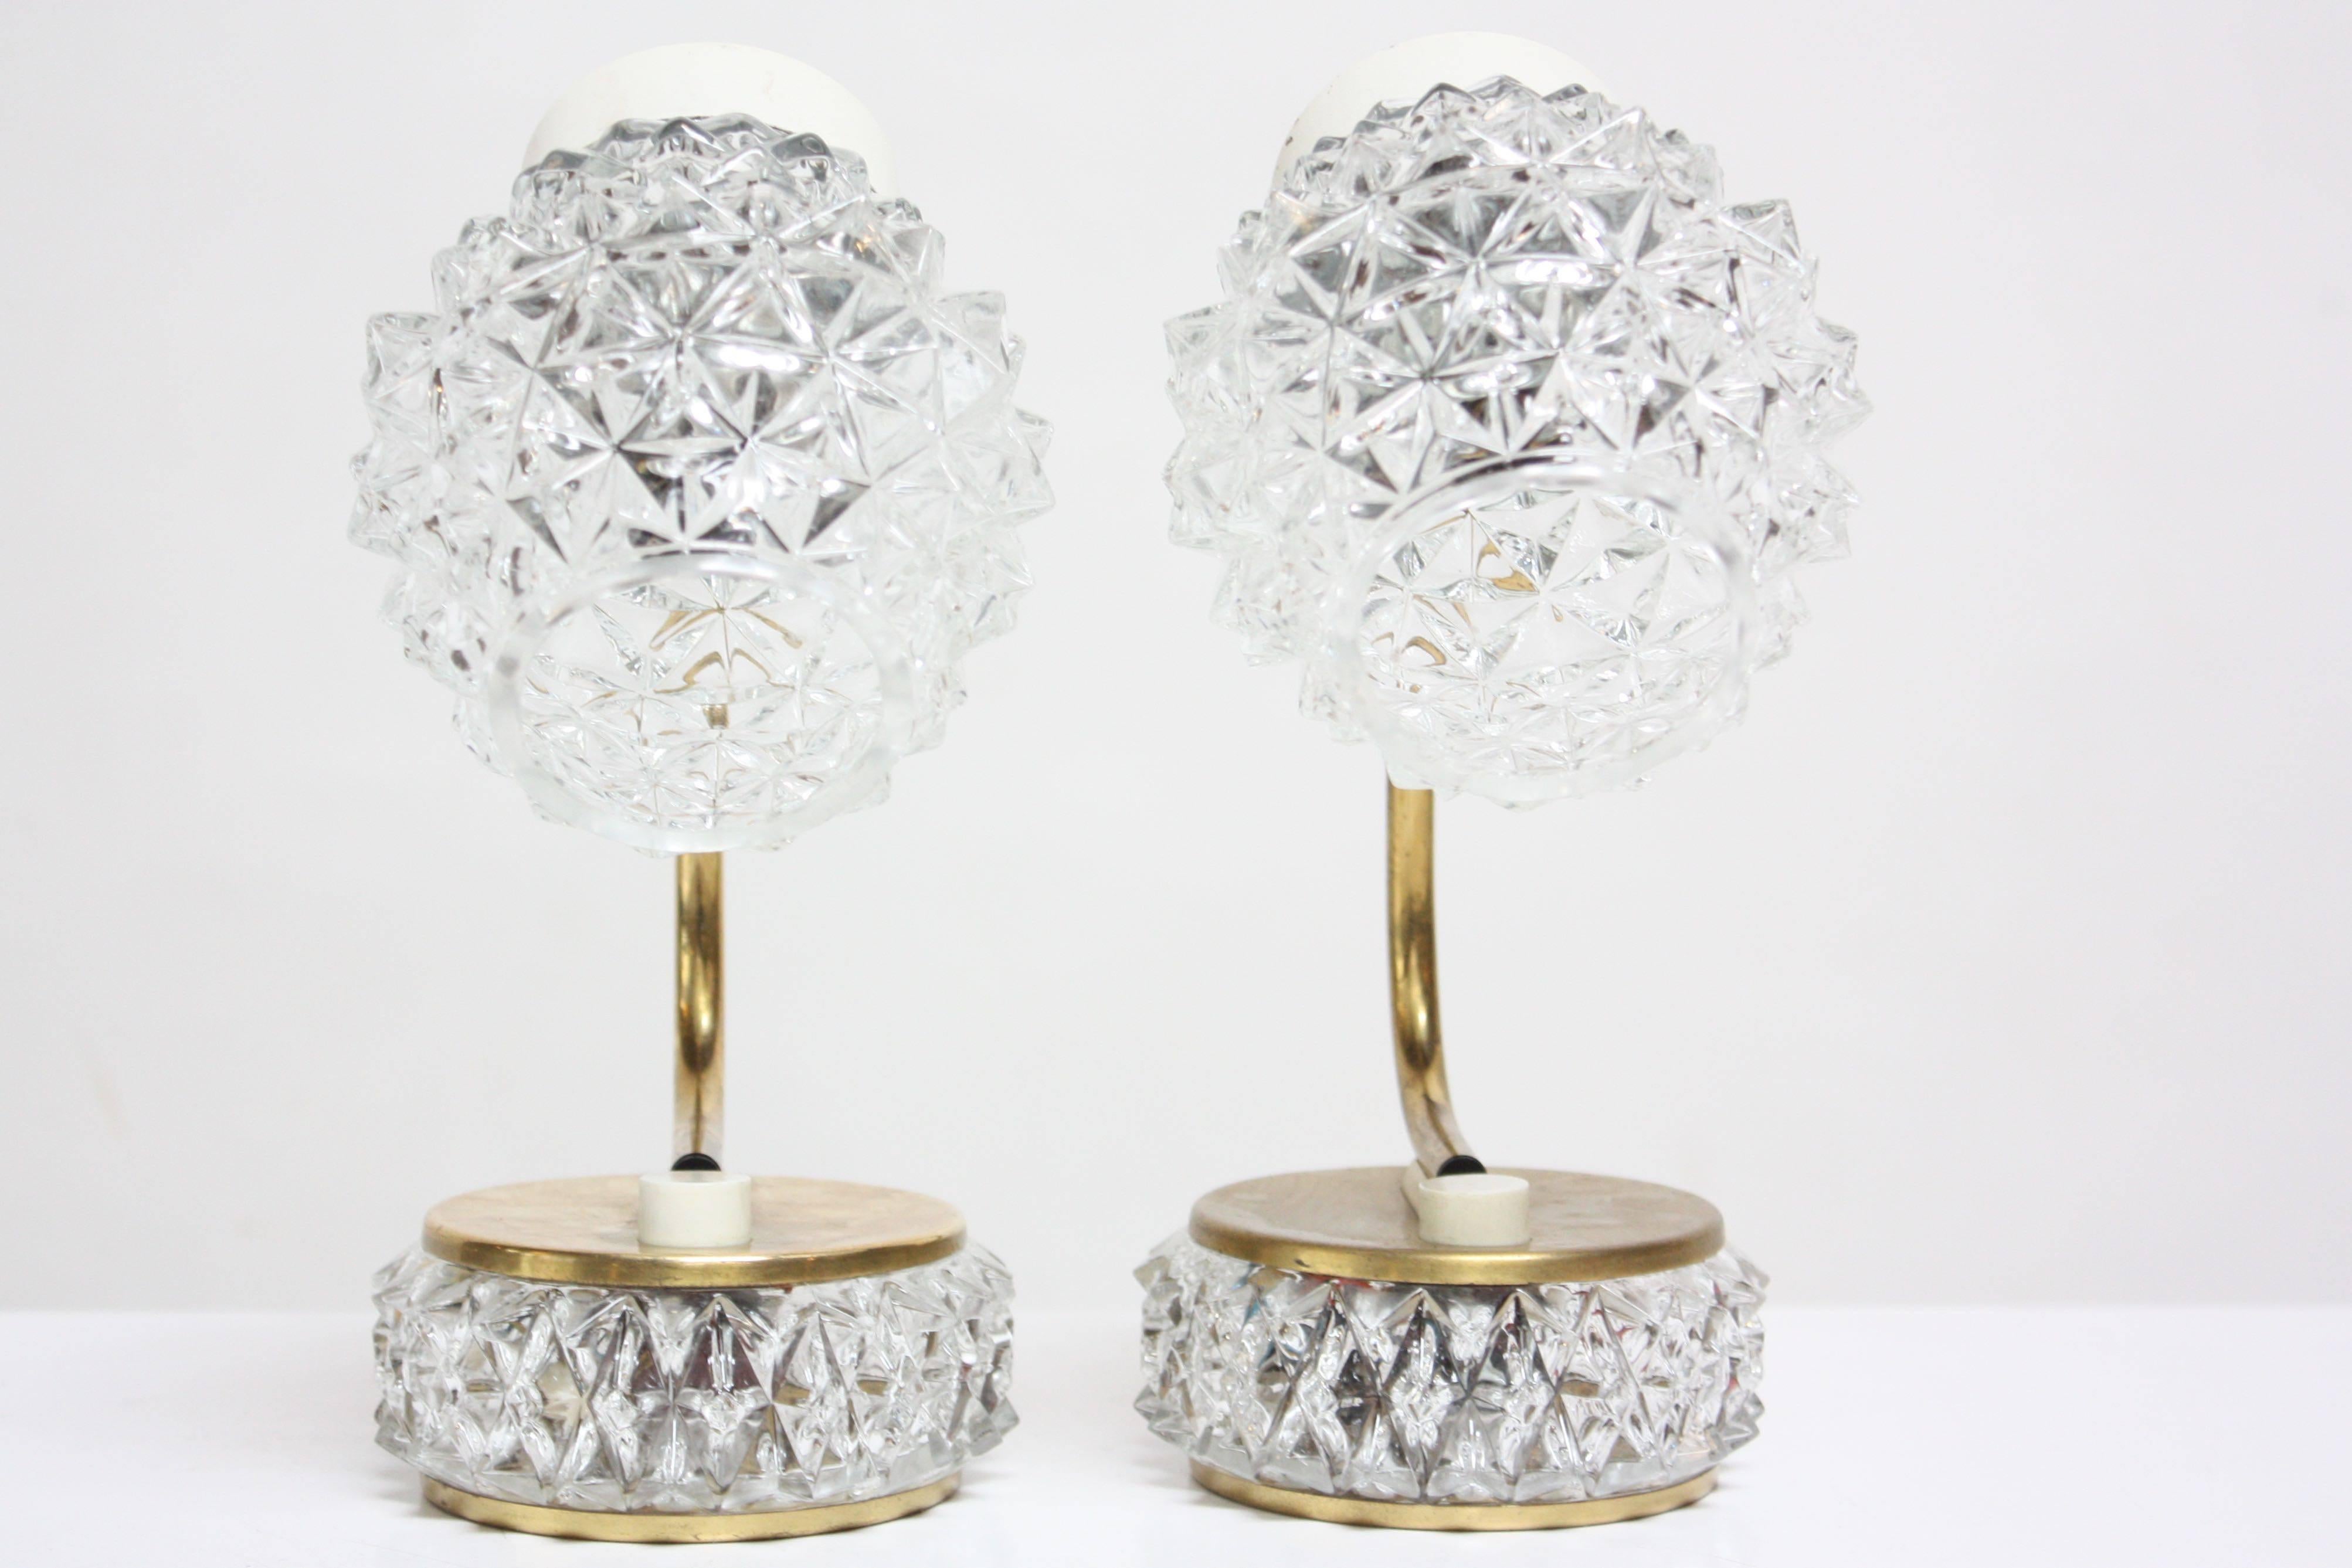 Painted Pair of Petite German Table Lamps in Crystal and Brass